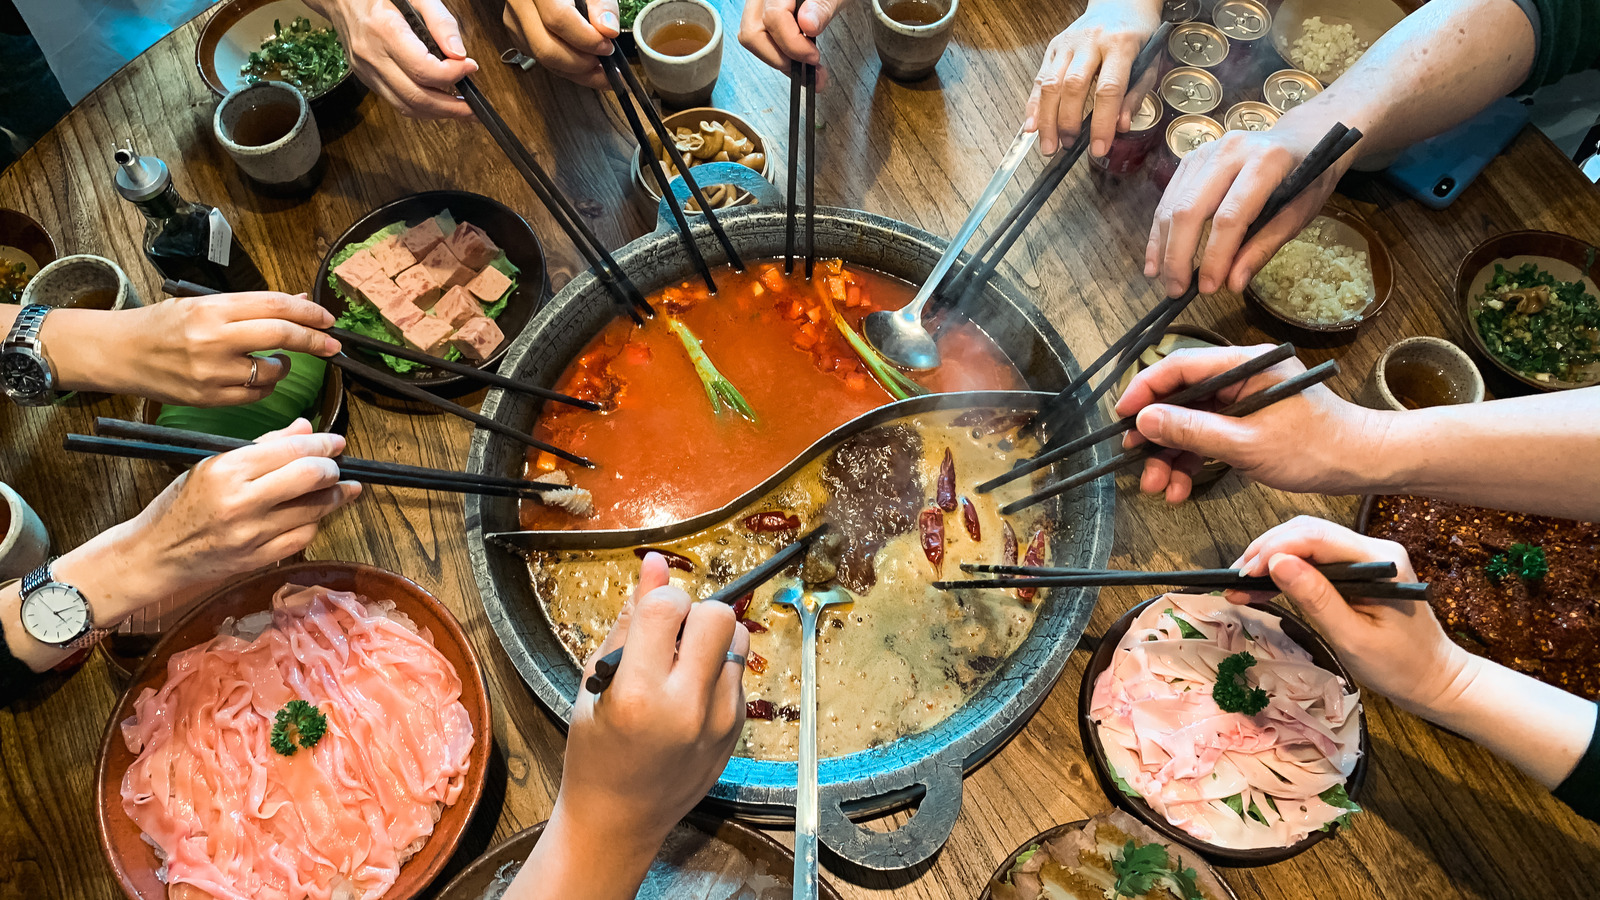 How to Make Hot Pot At Home, From the Broths to the Add-Ins to the